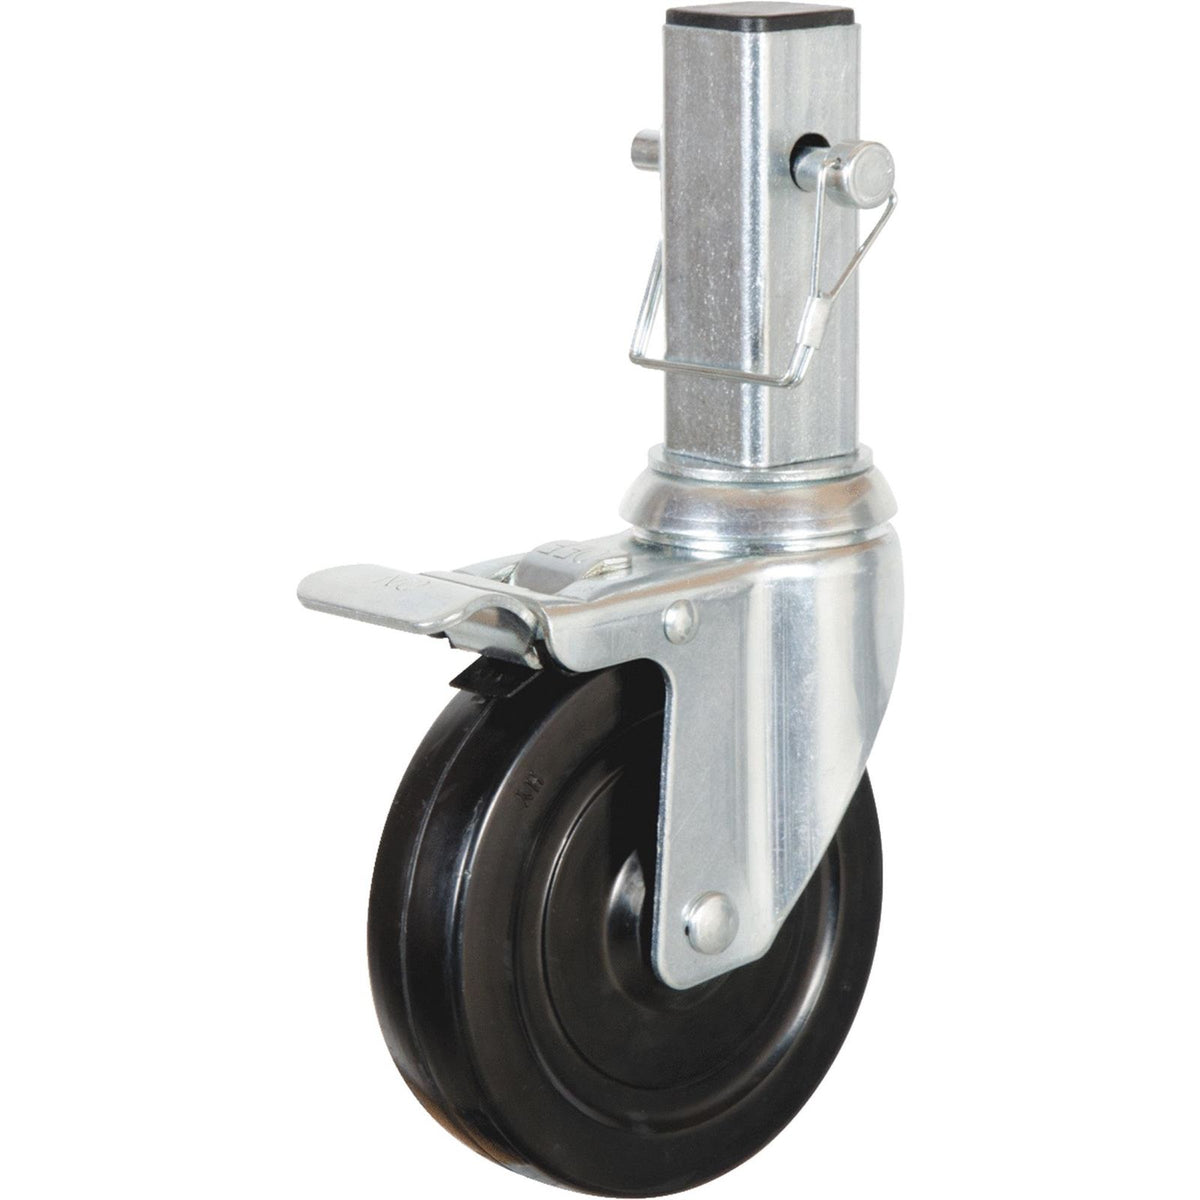 5 in. Locking Caster Wheel for Baker Style Rolling Scaffold H.D. Hard Rubber 1"